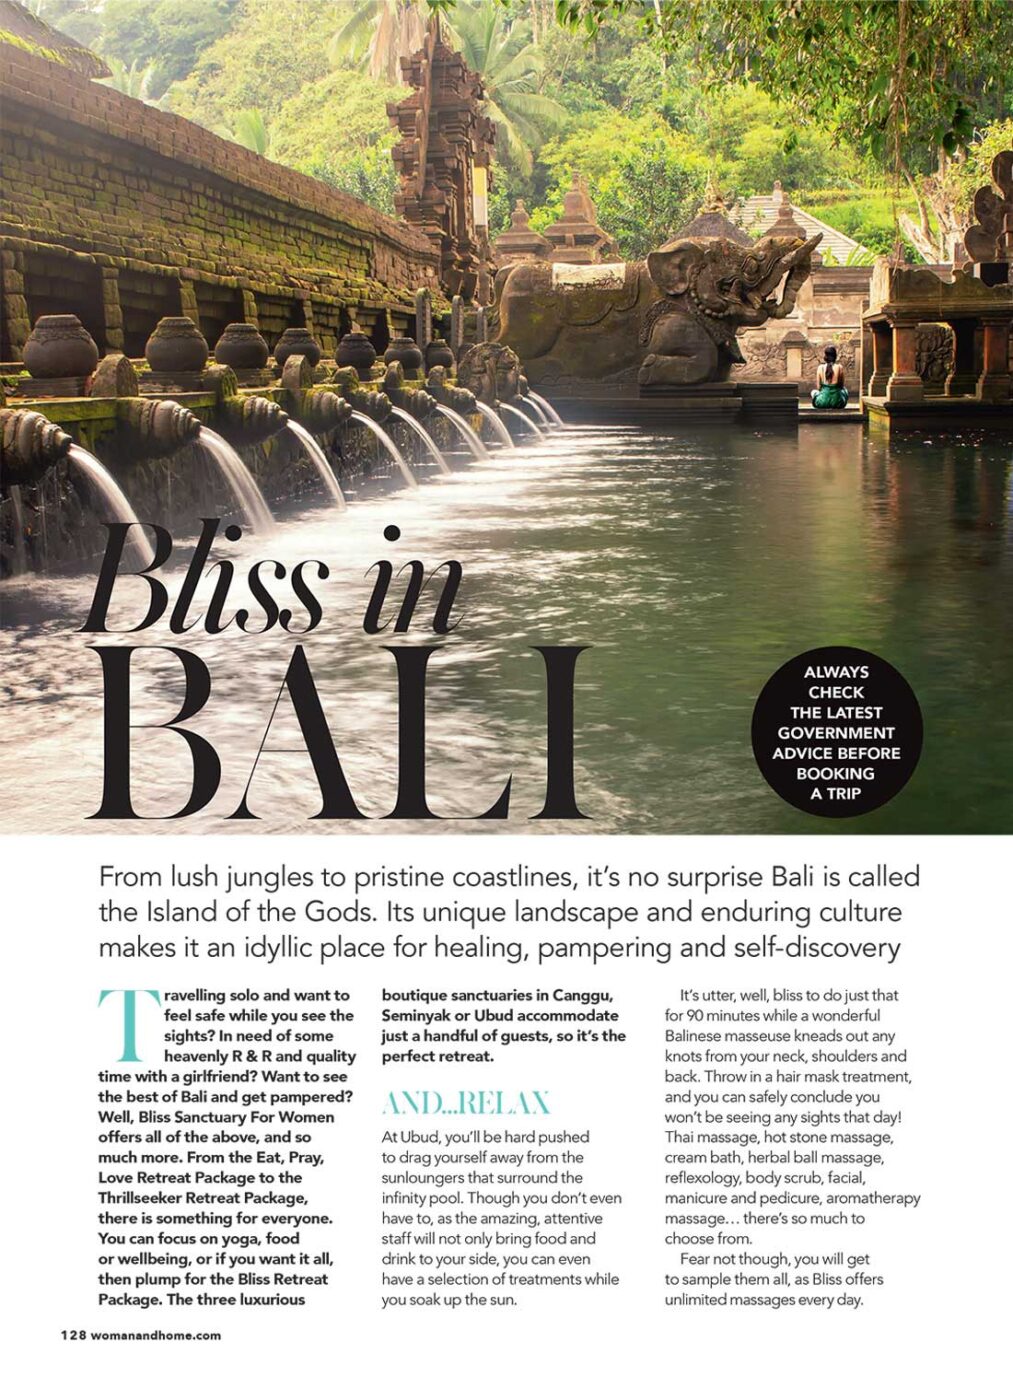 Bliss Sanctuary for Women featured in Woman & Home Magazine